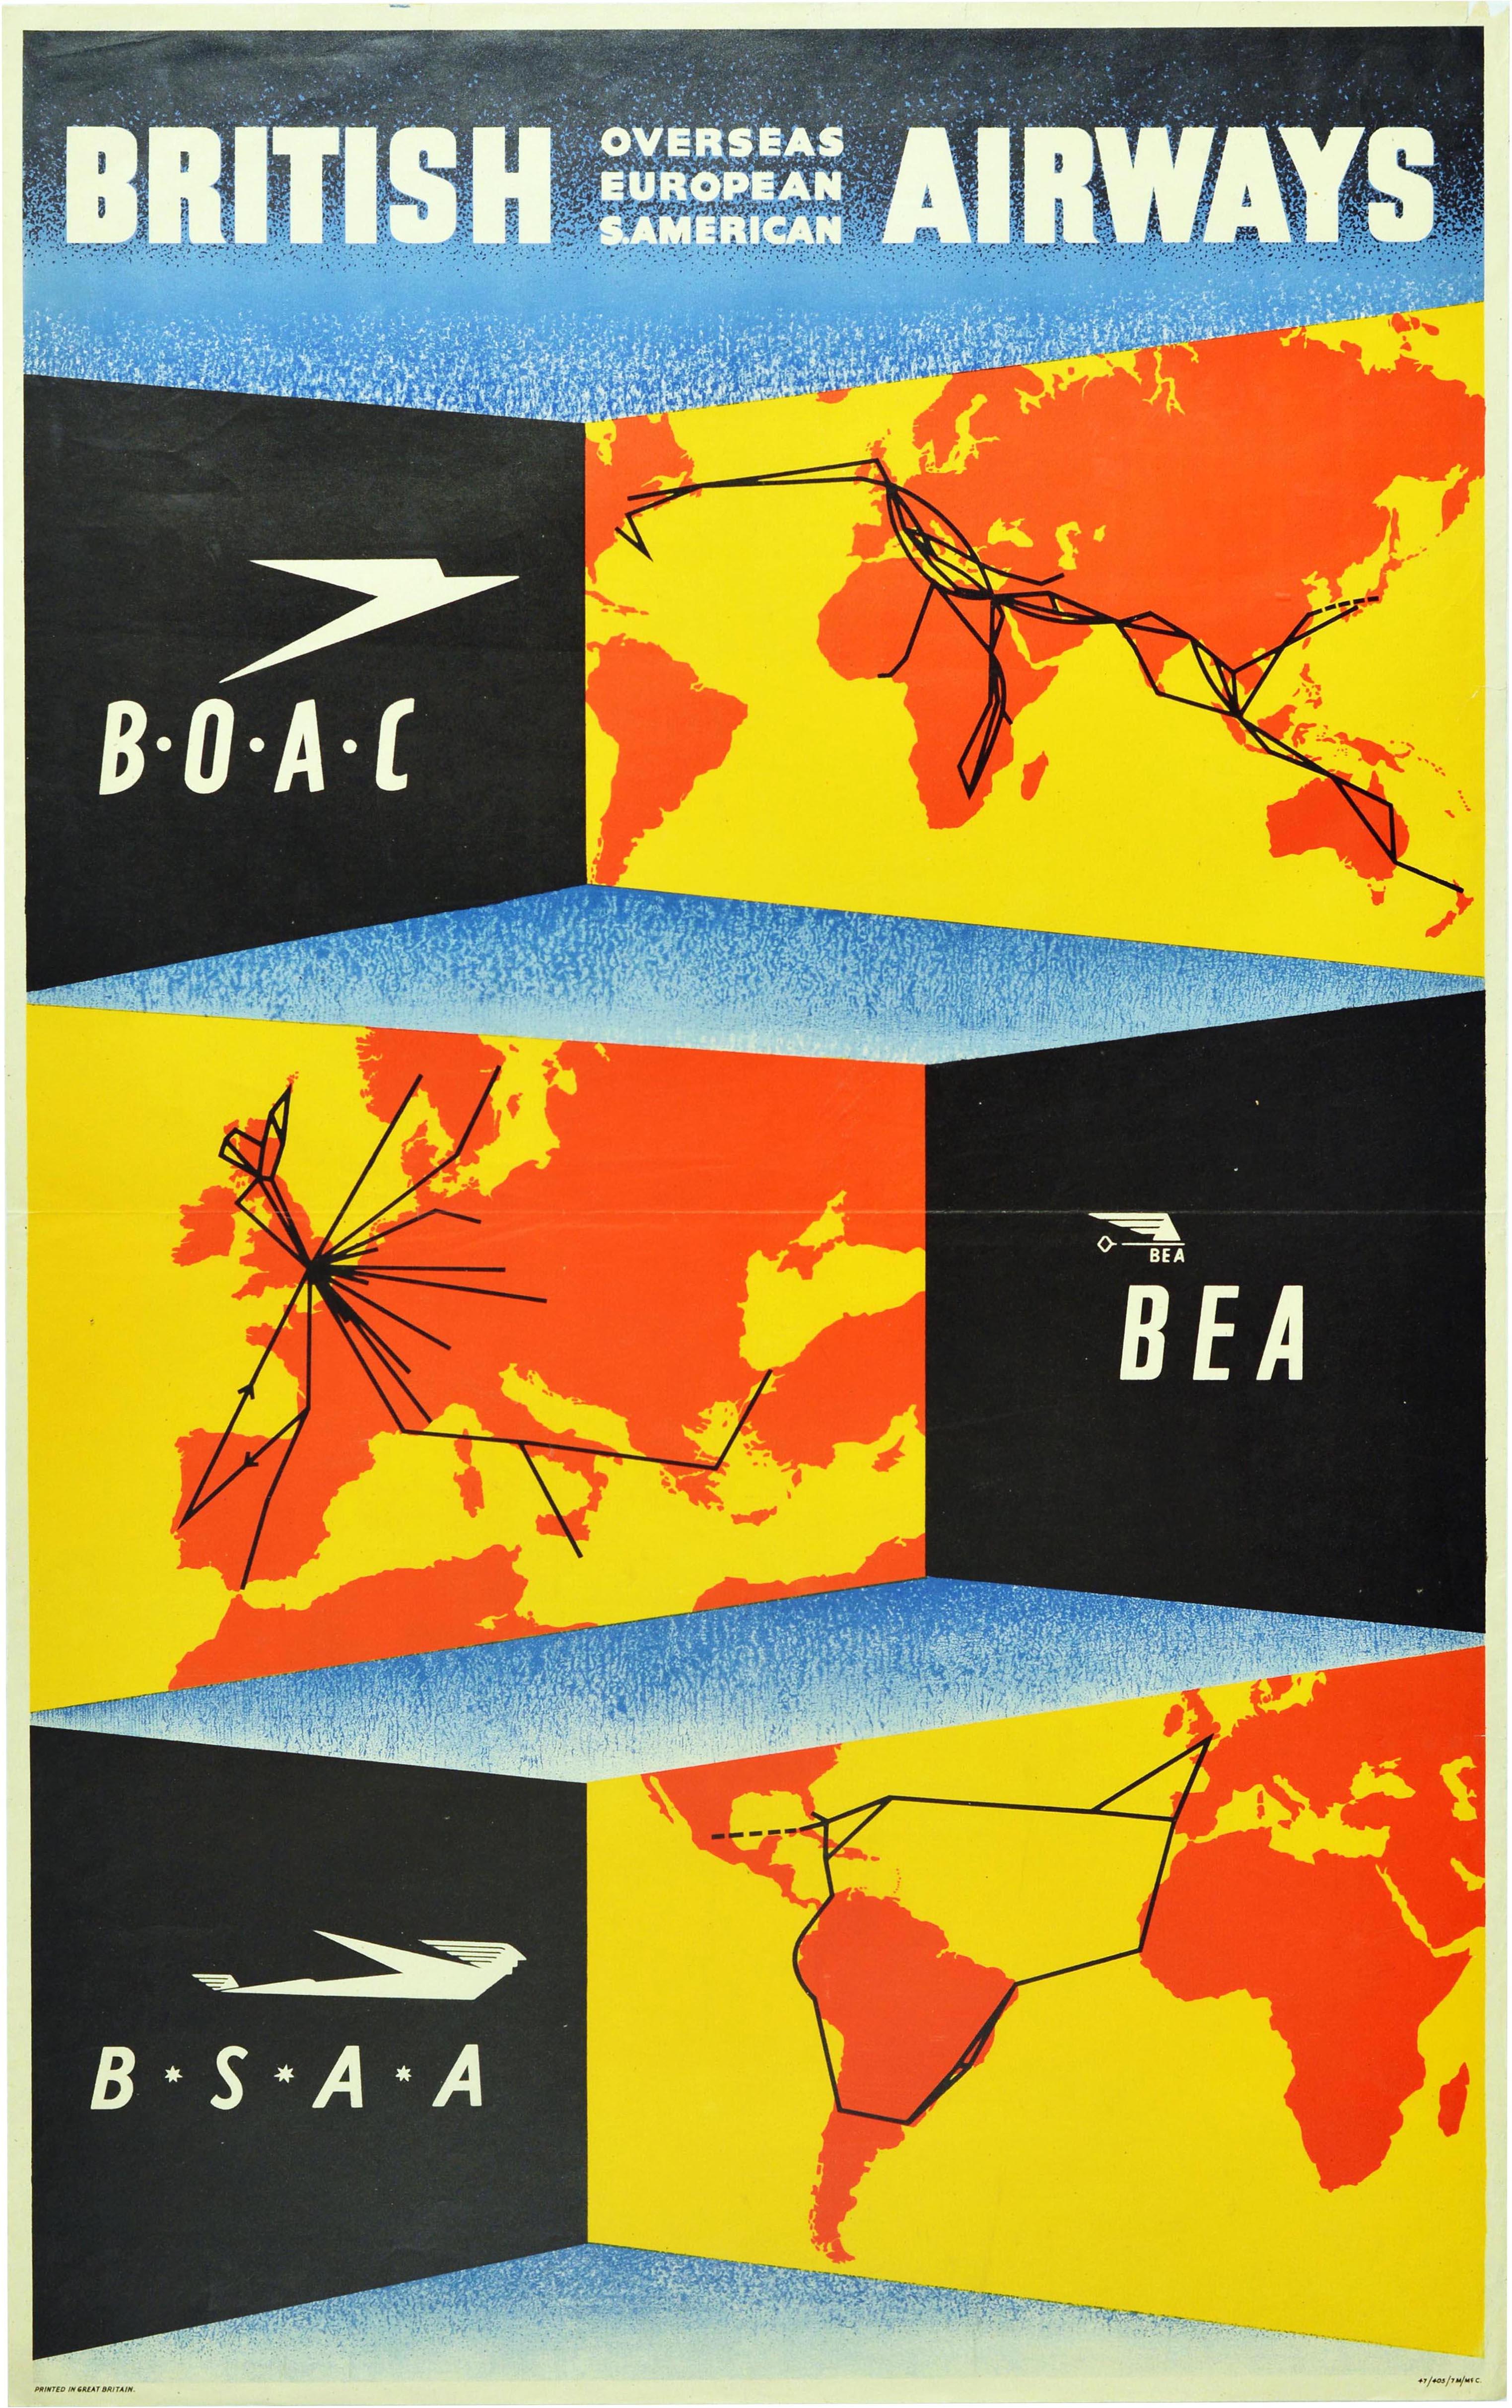 Original vintage advertising poster promoting British airline companies - BEA BOAC BSAA British European Overseas S American Airways - featuring a colourful graphic design showing three yellow and orange maps marked with flight routes and the